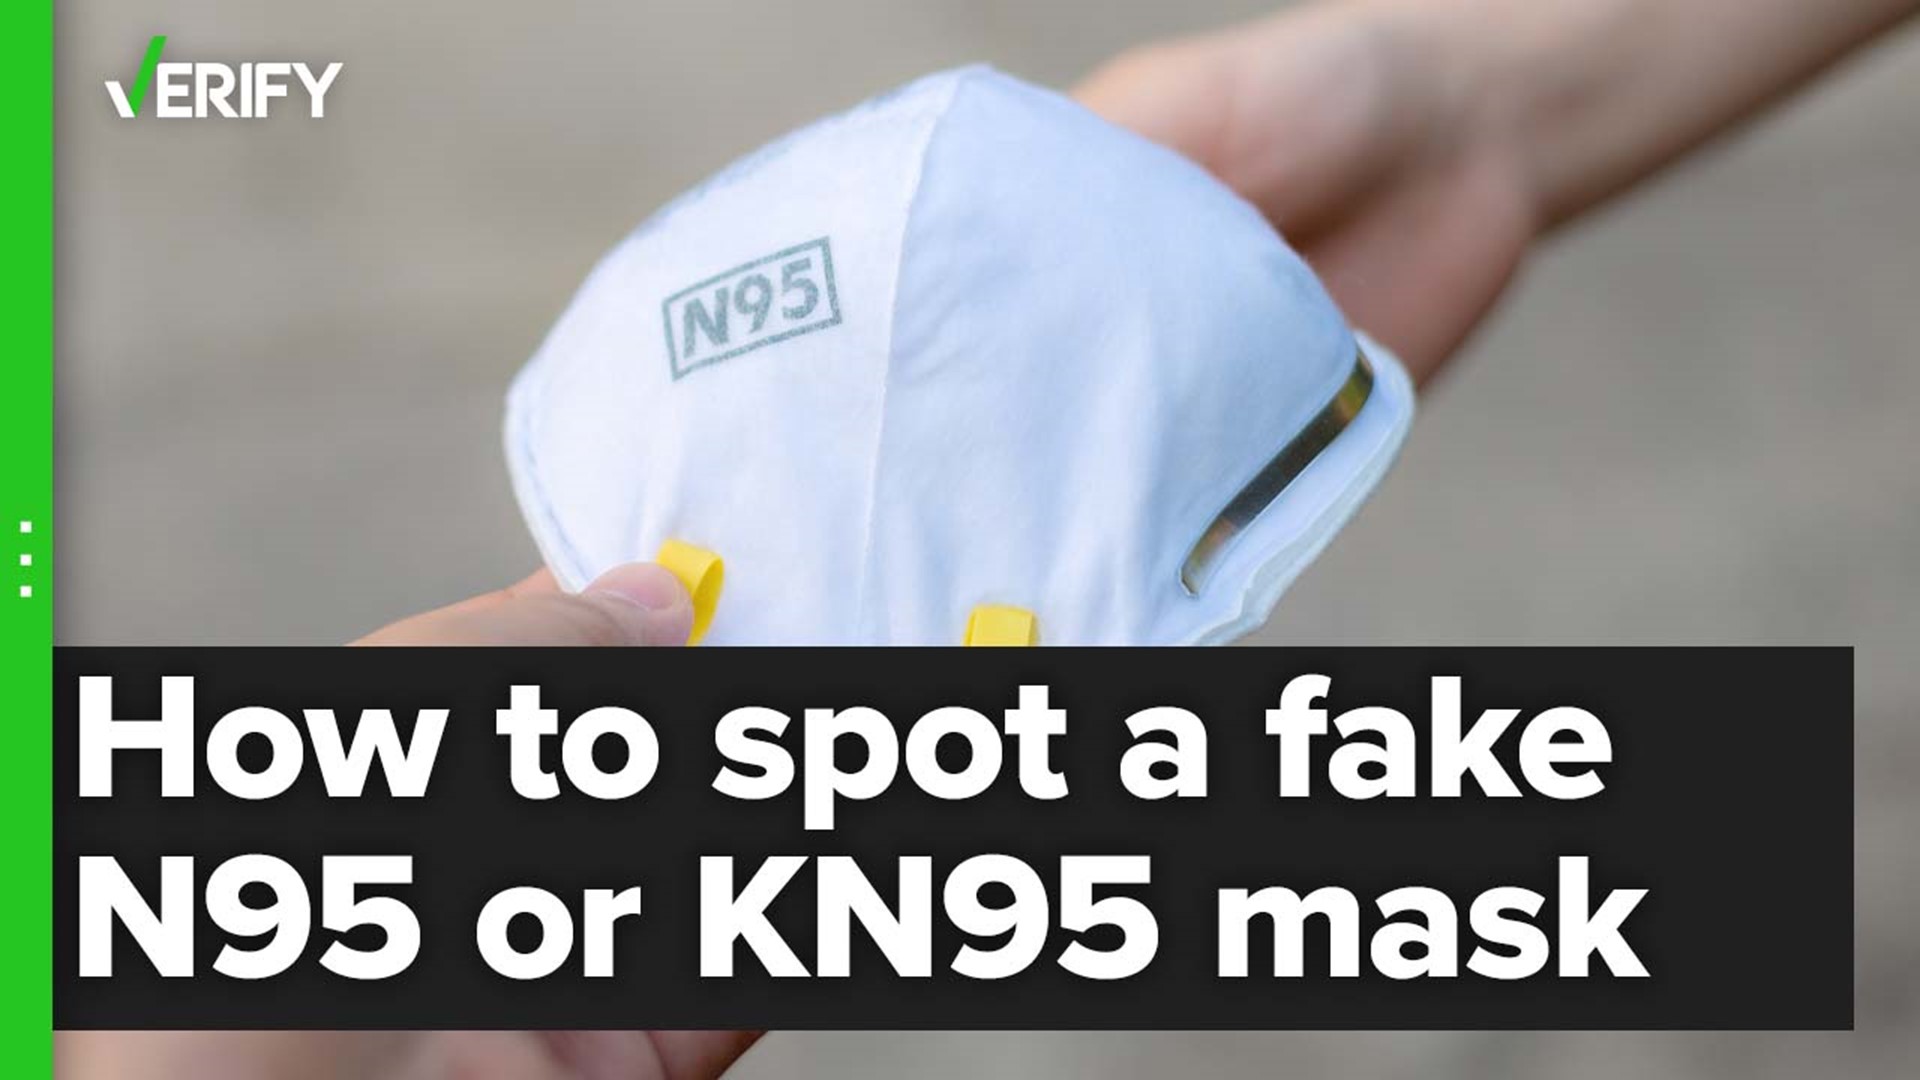 Since the start of the coronavirus pandemic, U.S. Customs and Border Protection officers have seized millions of counterfeit masks. Here’s how to spot a fake.